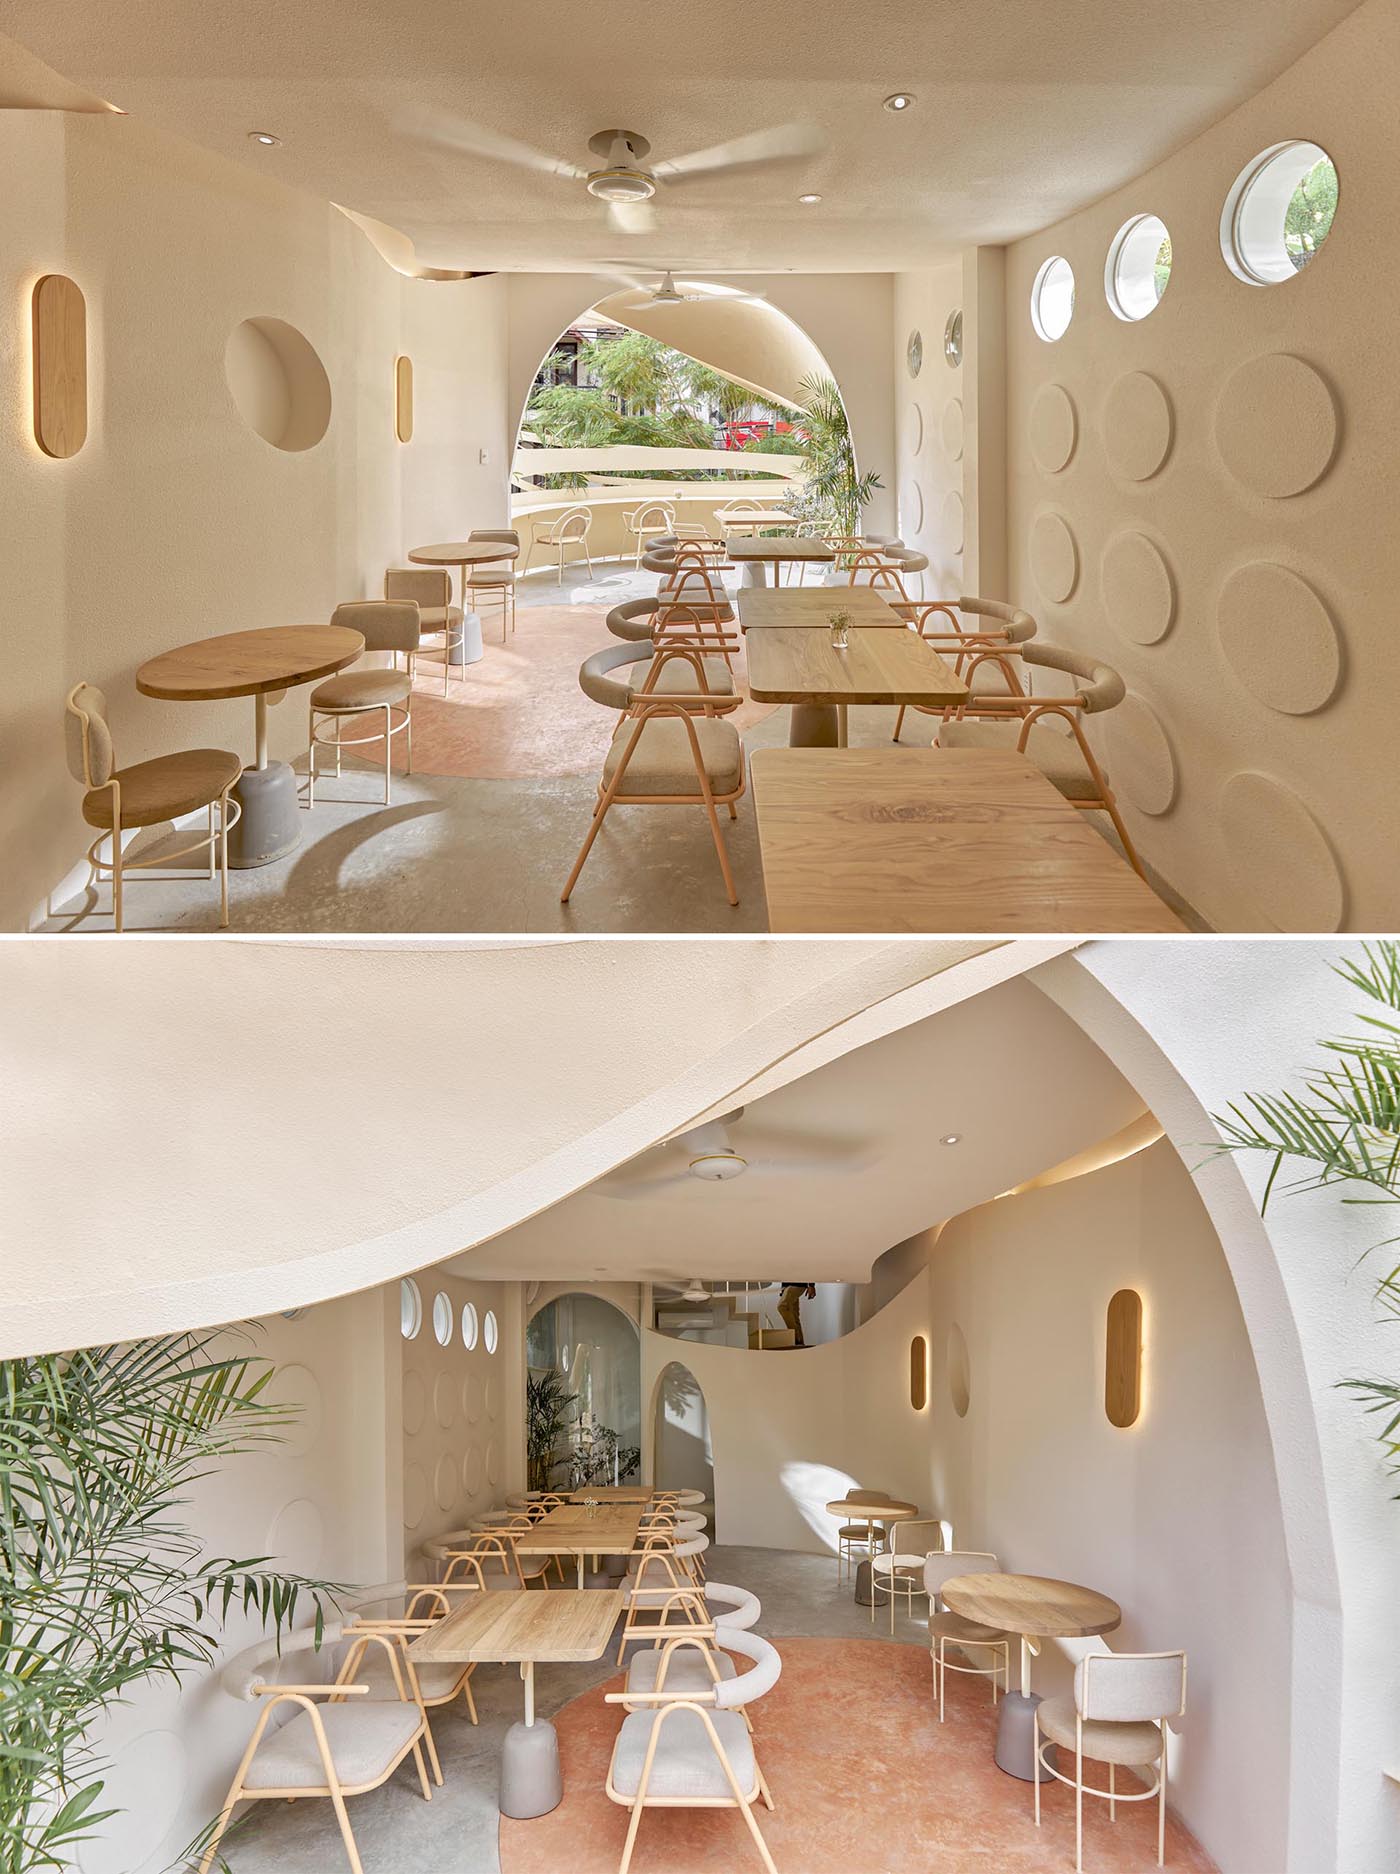 A modern coffee shop has an accent wall with circular elements that complement the matching windows above.